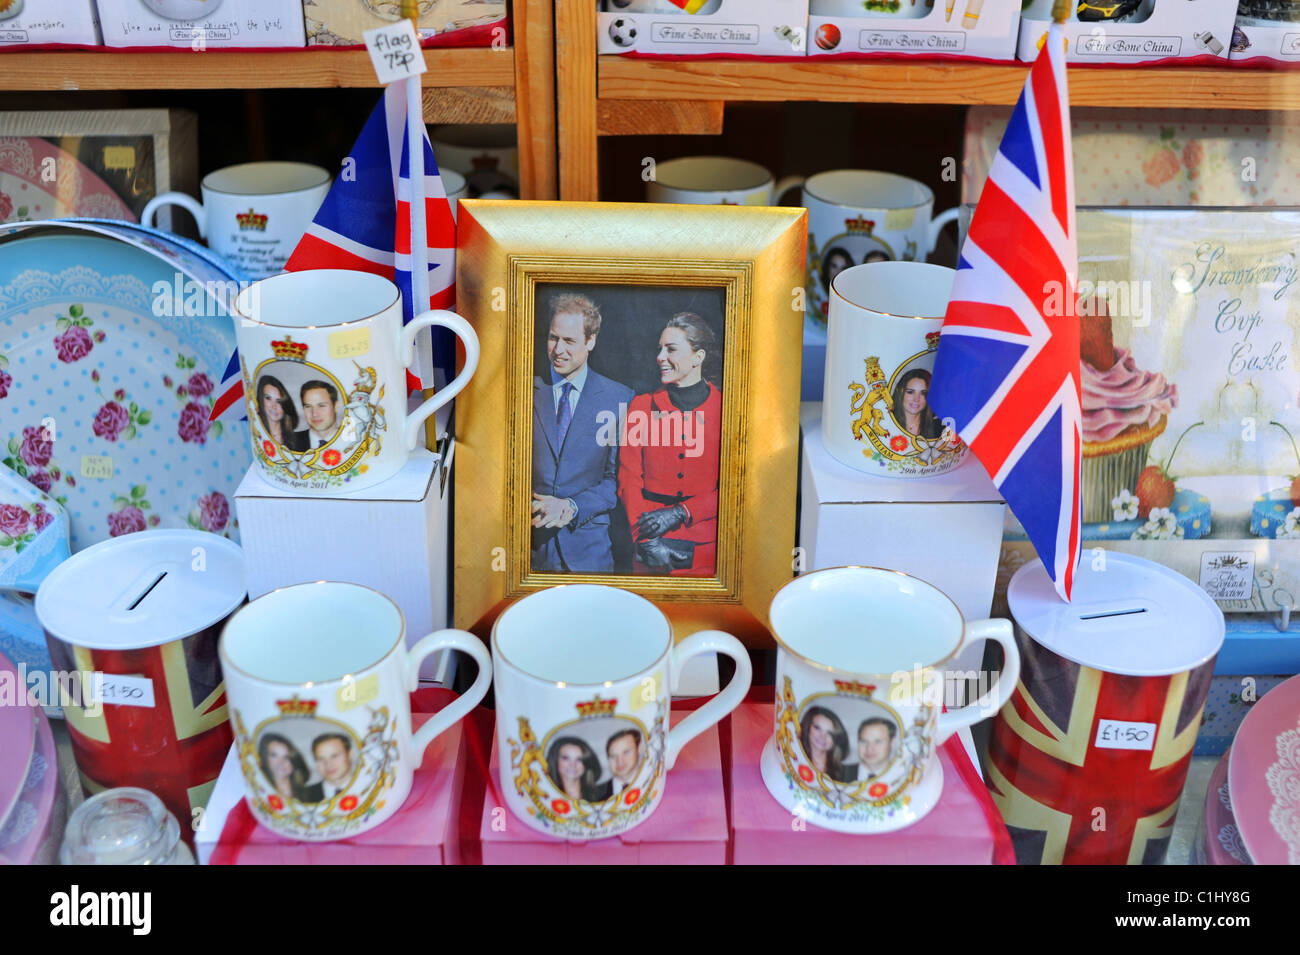 Memorabilia ready for the wedding of HRH Prince William to Kate Middleton in a shop window in Buxton UK Stock Photo